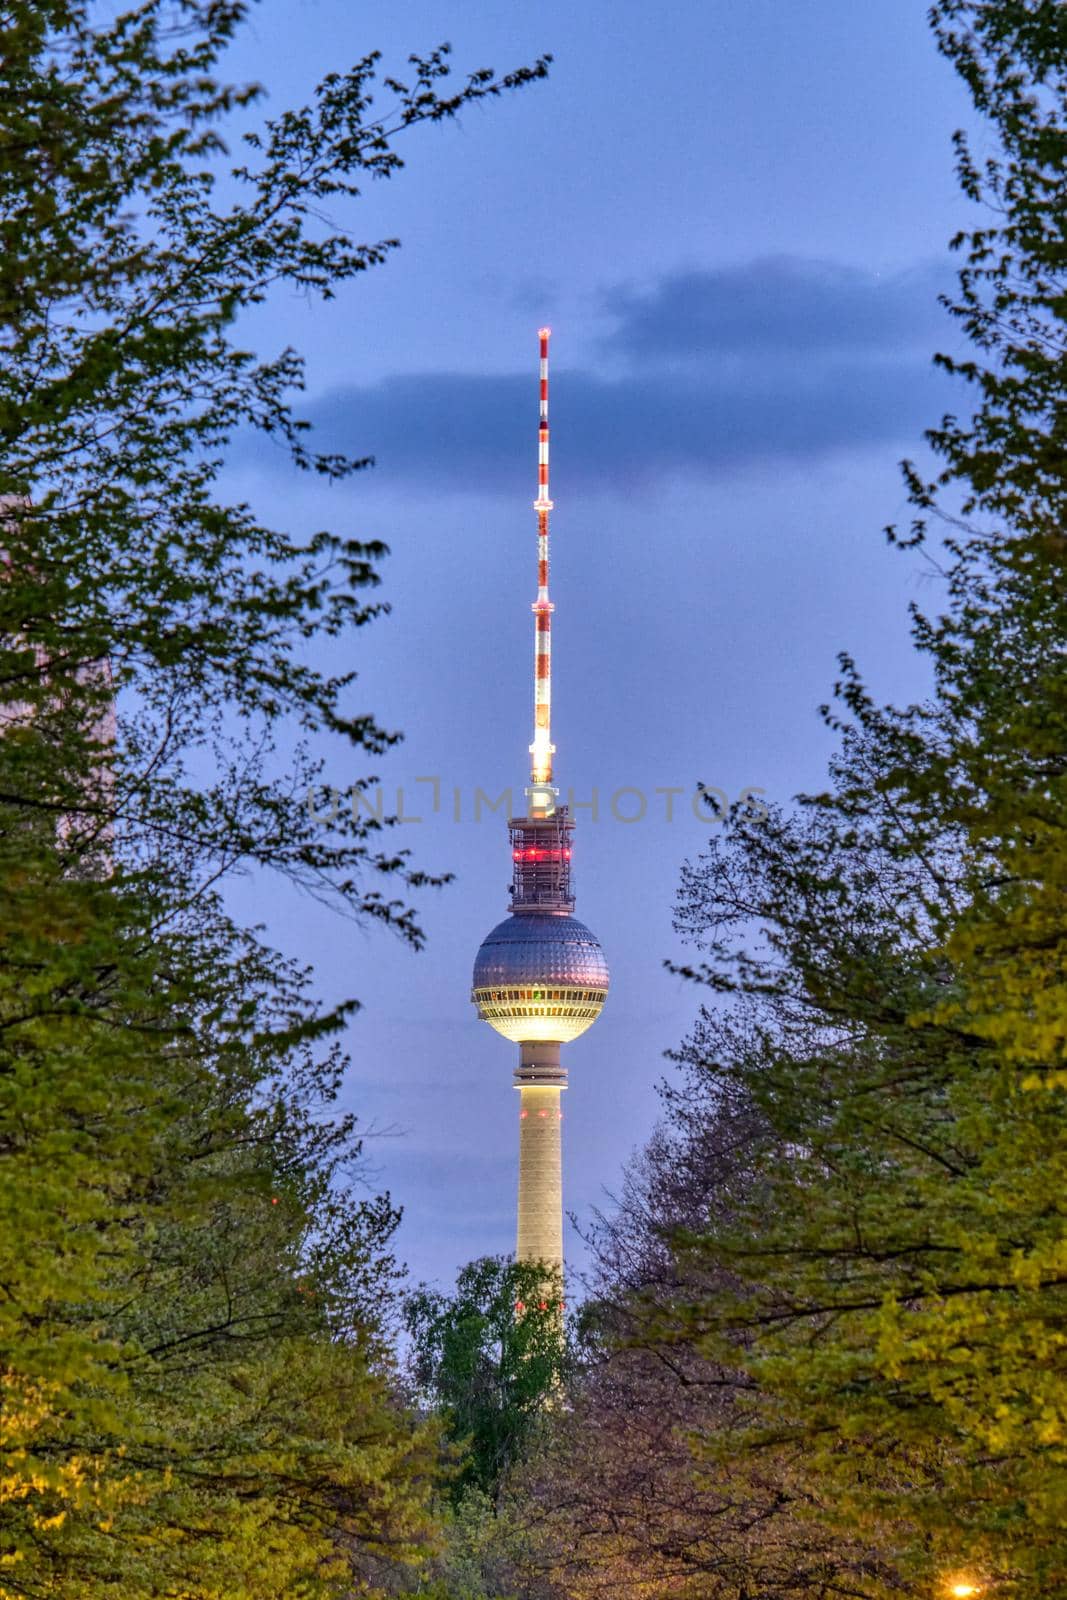 The famous TV Tower in Berlin at night seen through some trees